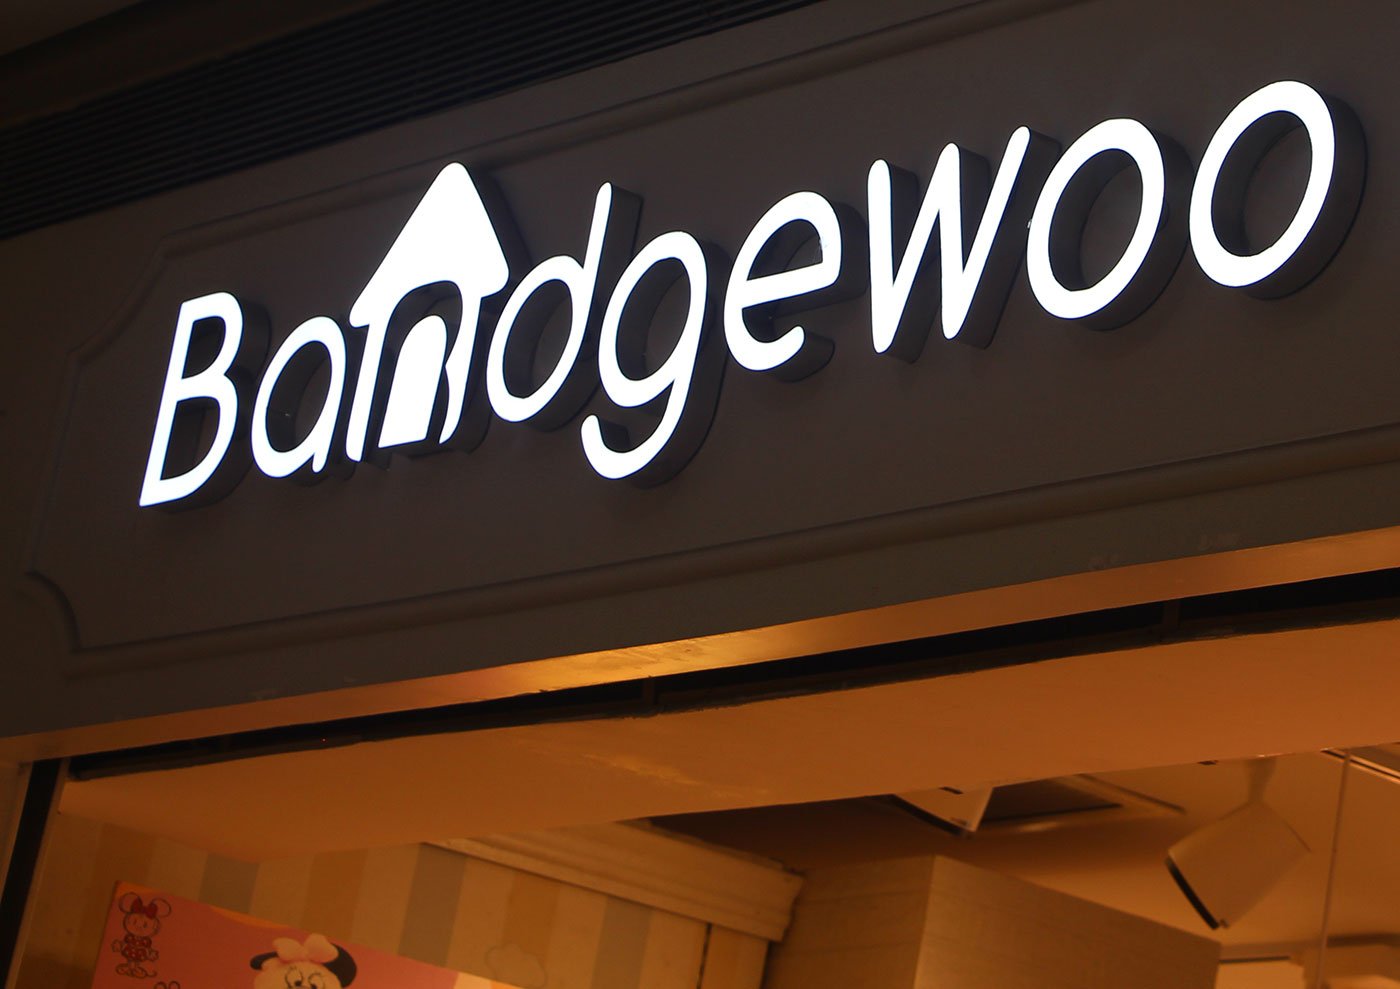 face lit channel letter bandgewoo